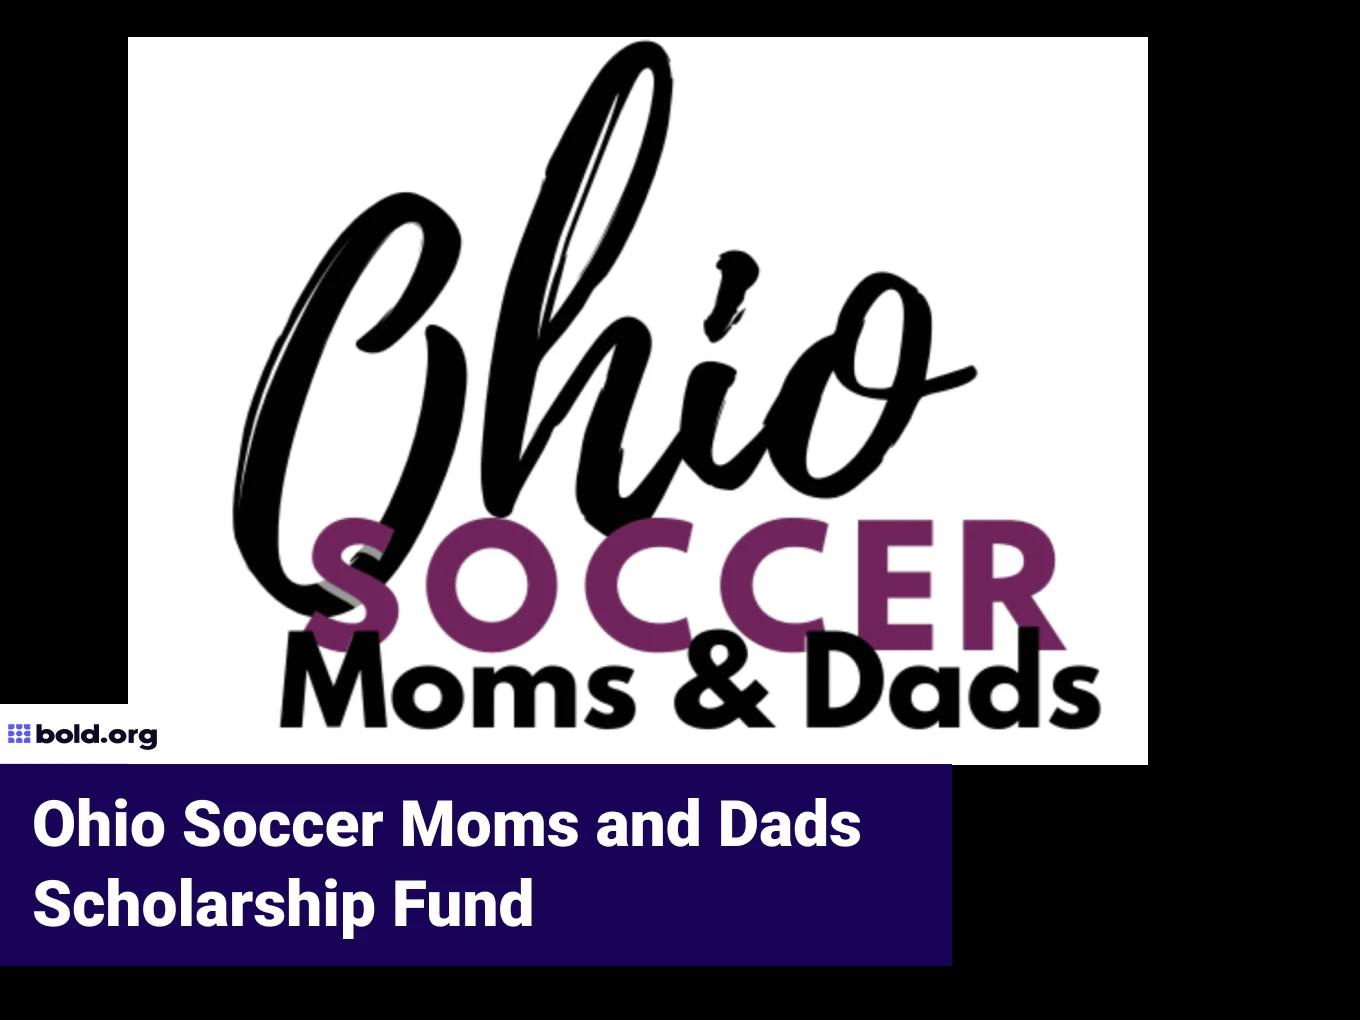 Ohio Soccer Moms and Dads Scholarship Fund